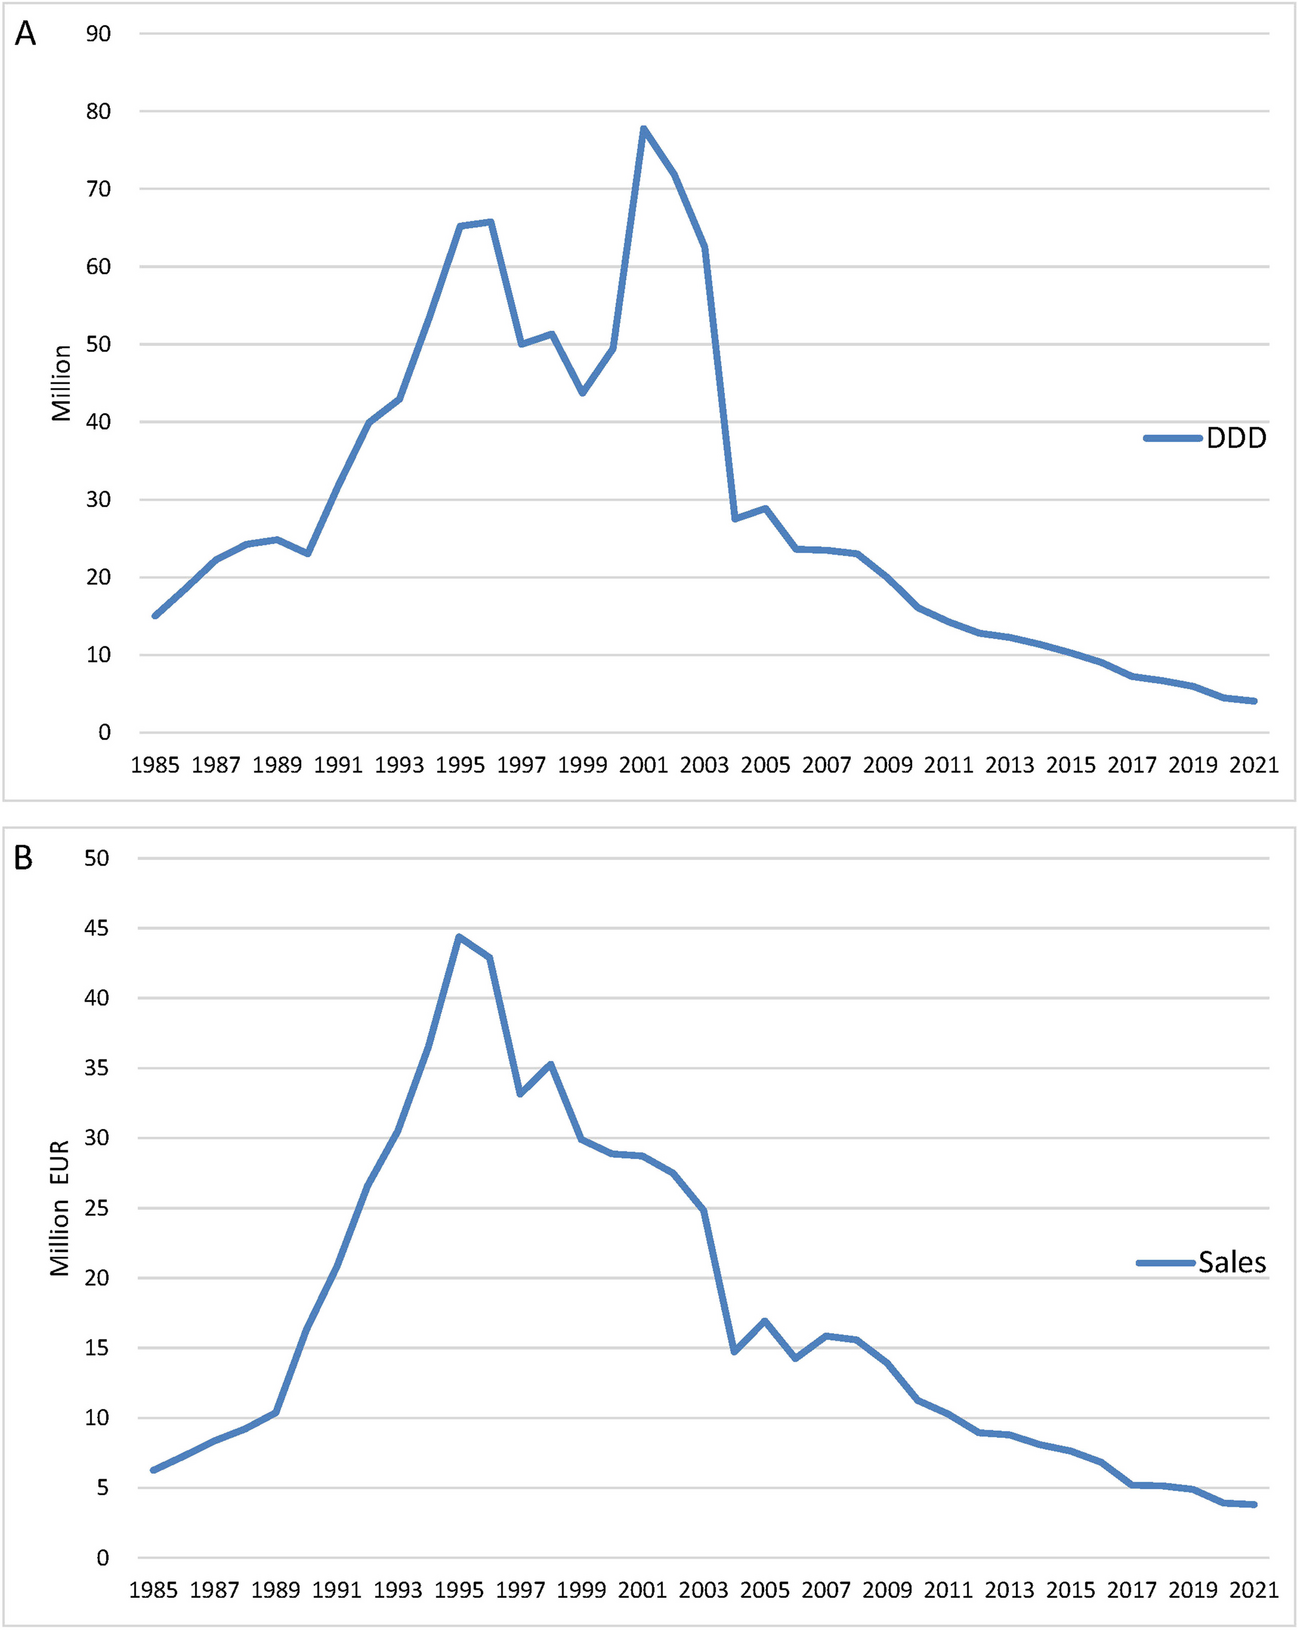 Prescriptions of homeopathic remedies at the expense of the German statutory health insurance from 1985 to 2021: scientific, legal and pharmacoeconomic analysis